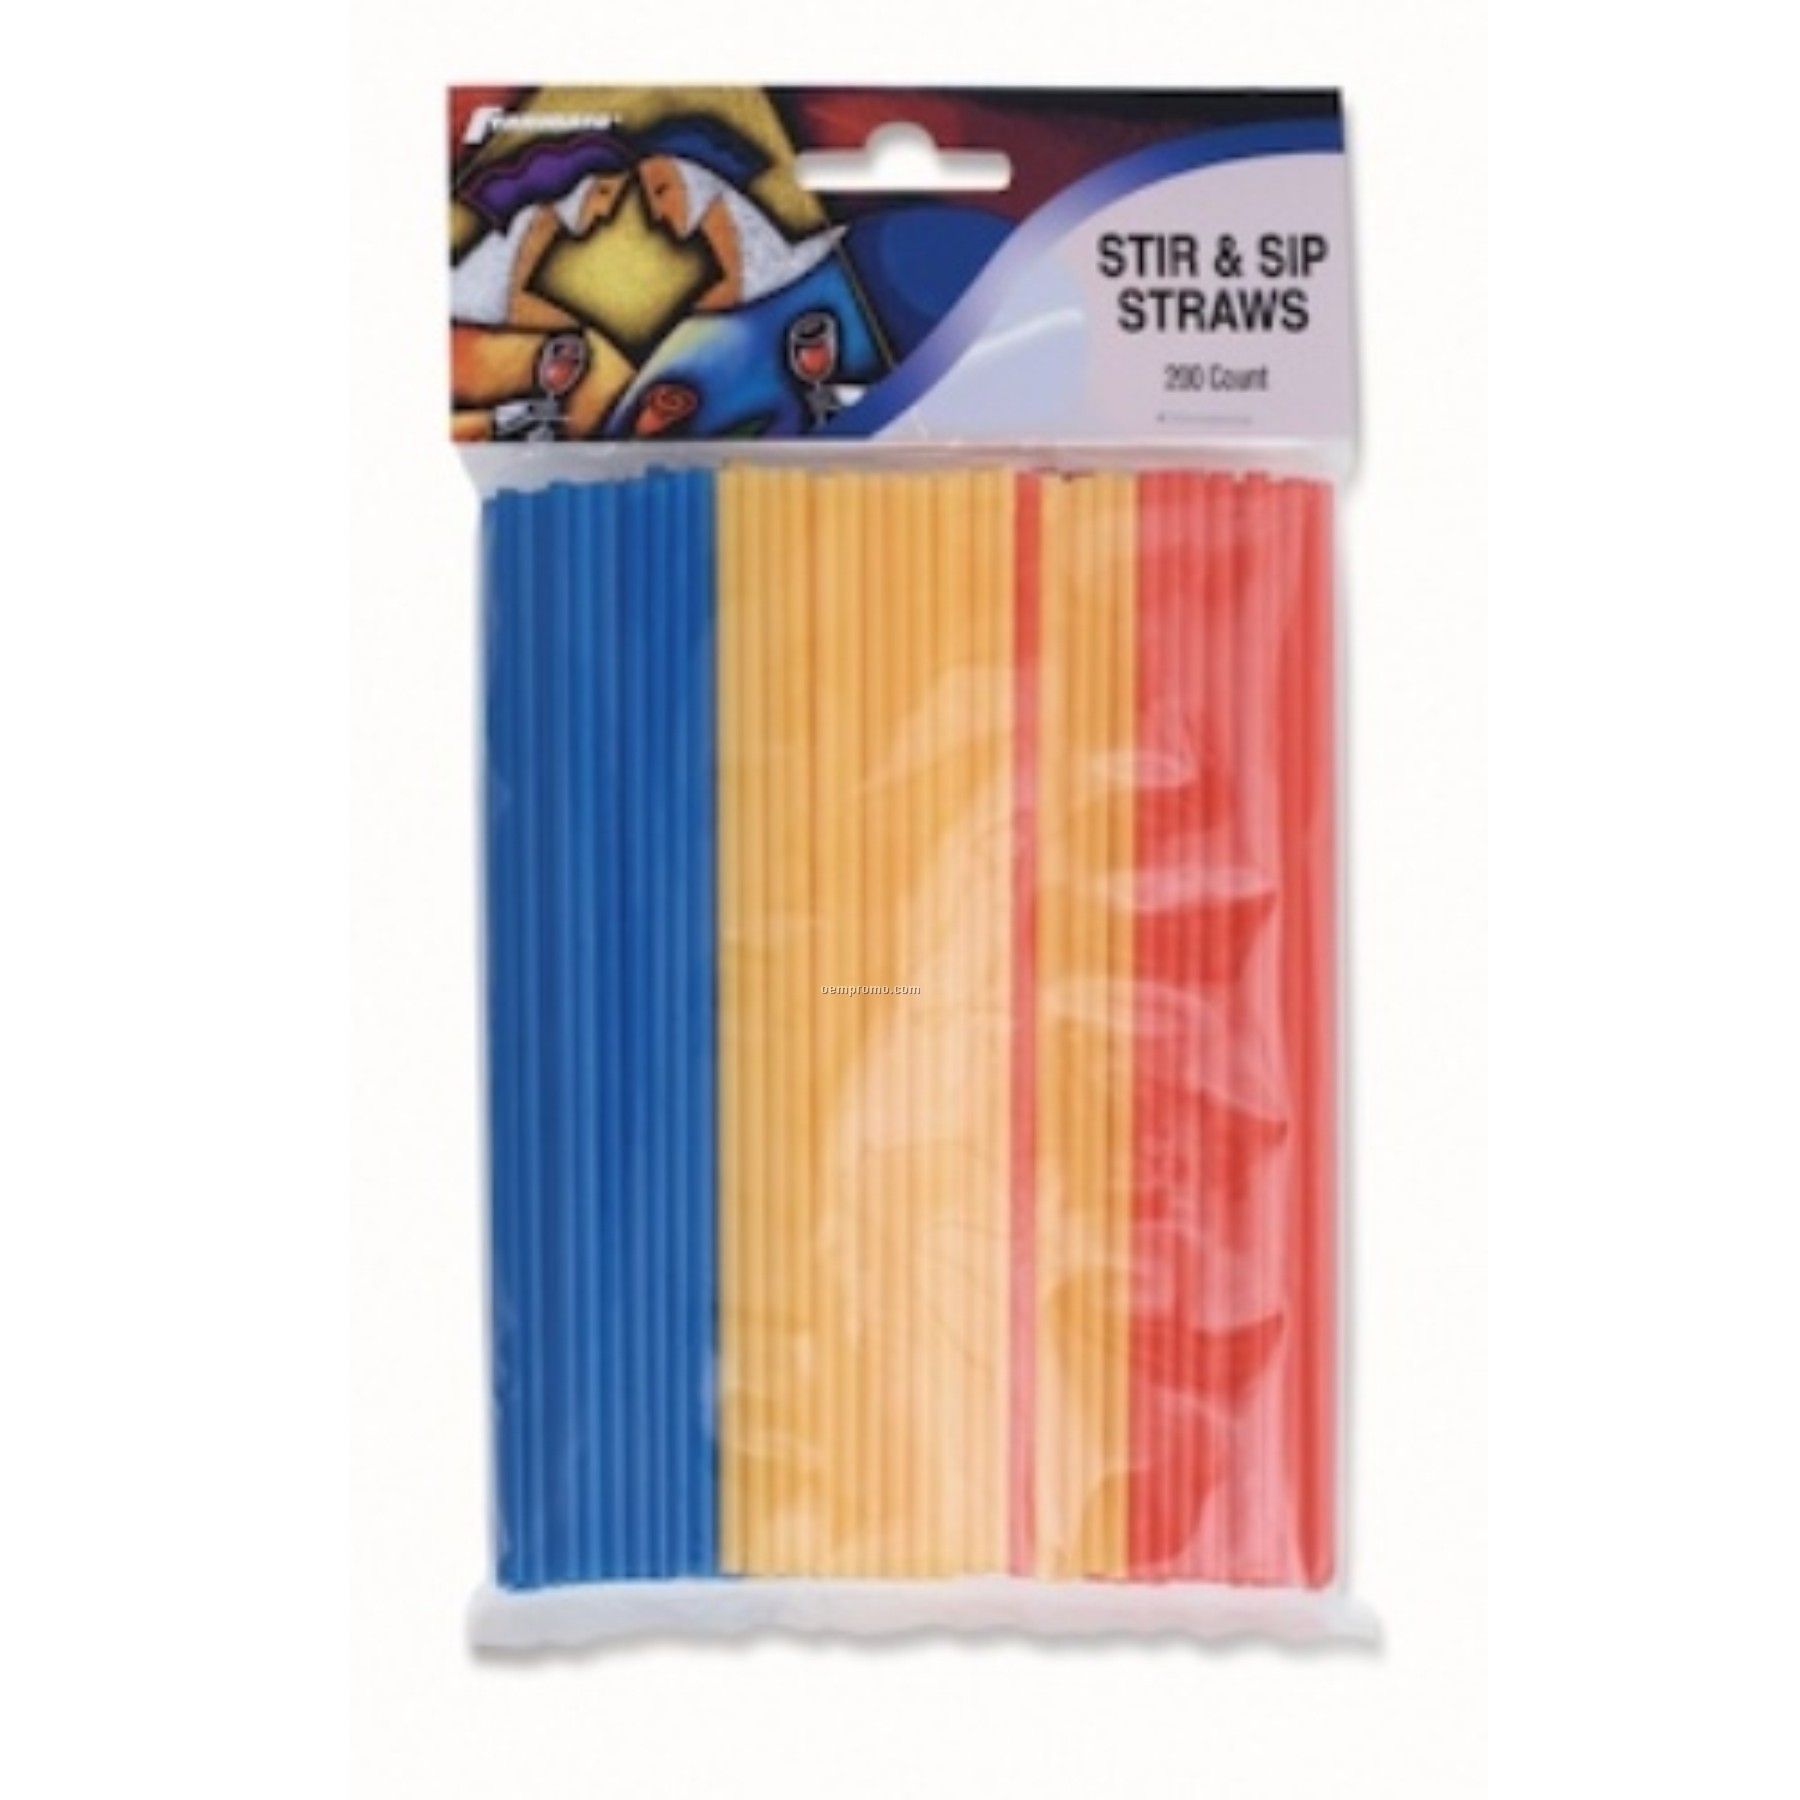 Stir And Sip Straws (200 Count)